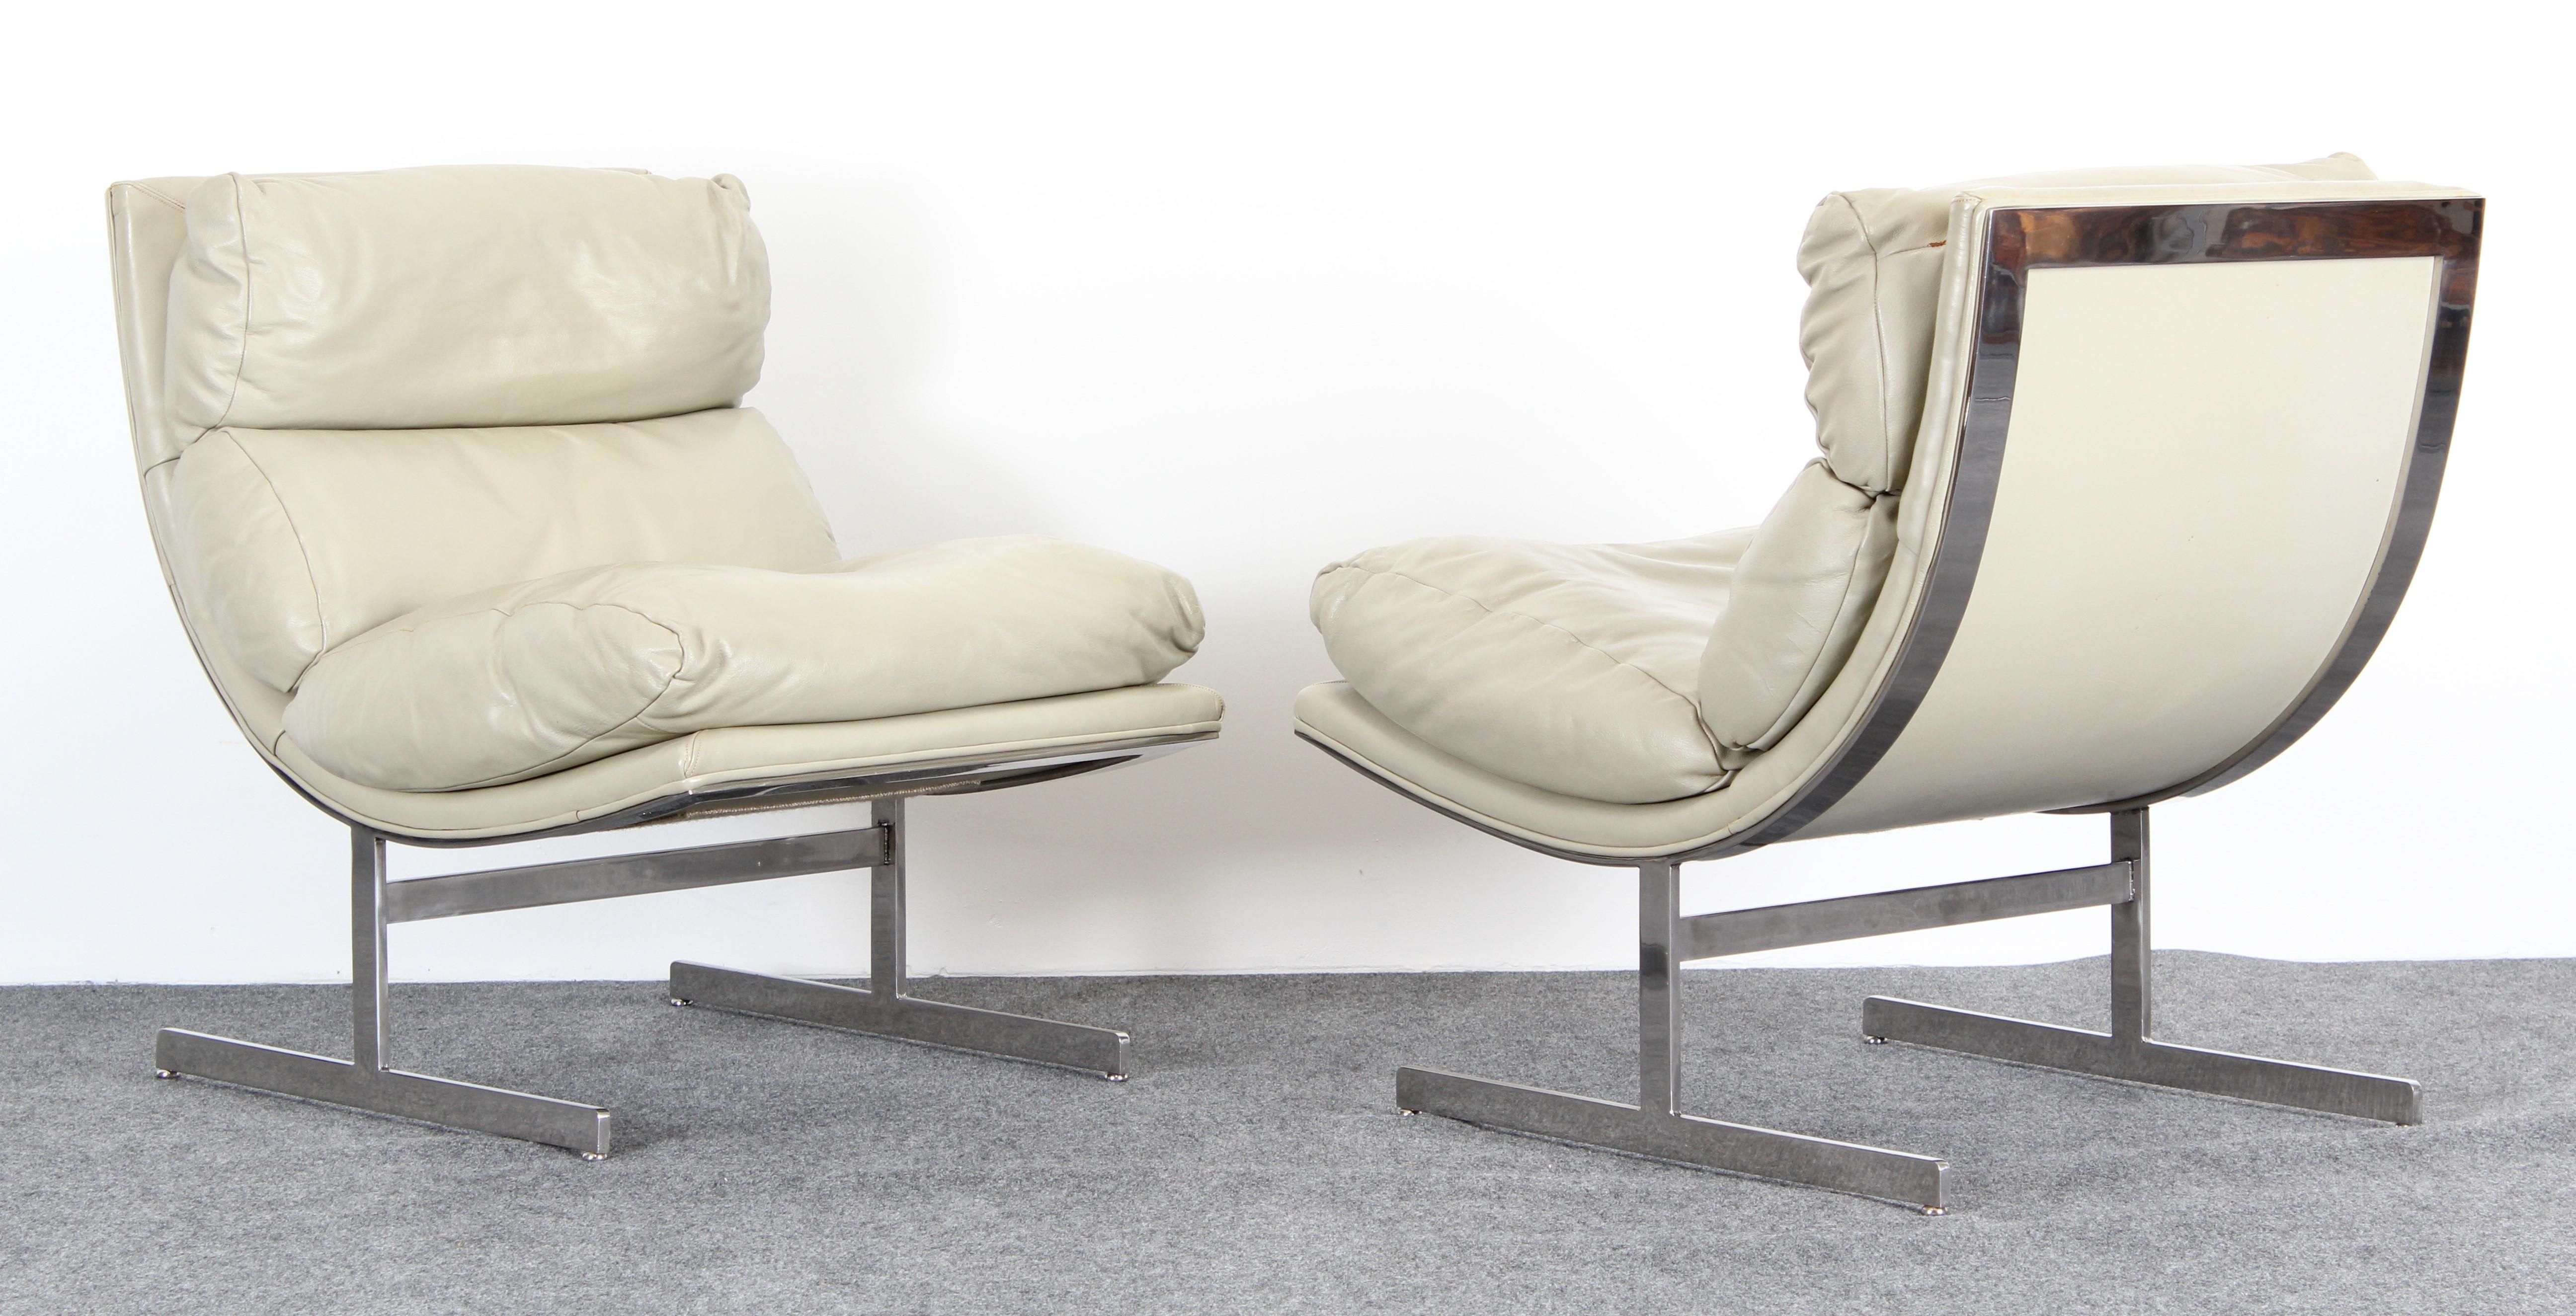 A modern pair of Kipp Stewart stainless steel lounge chairs for Directional. These chairs are covered in leather, however, new upholstery necessary, as shown in images. Stainless Steel is in excellent condition.

Dimensions: 33